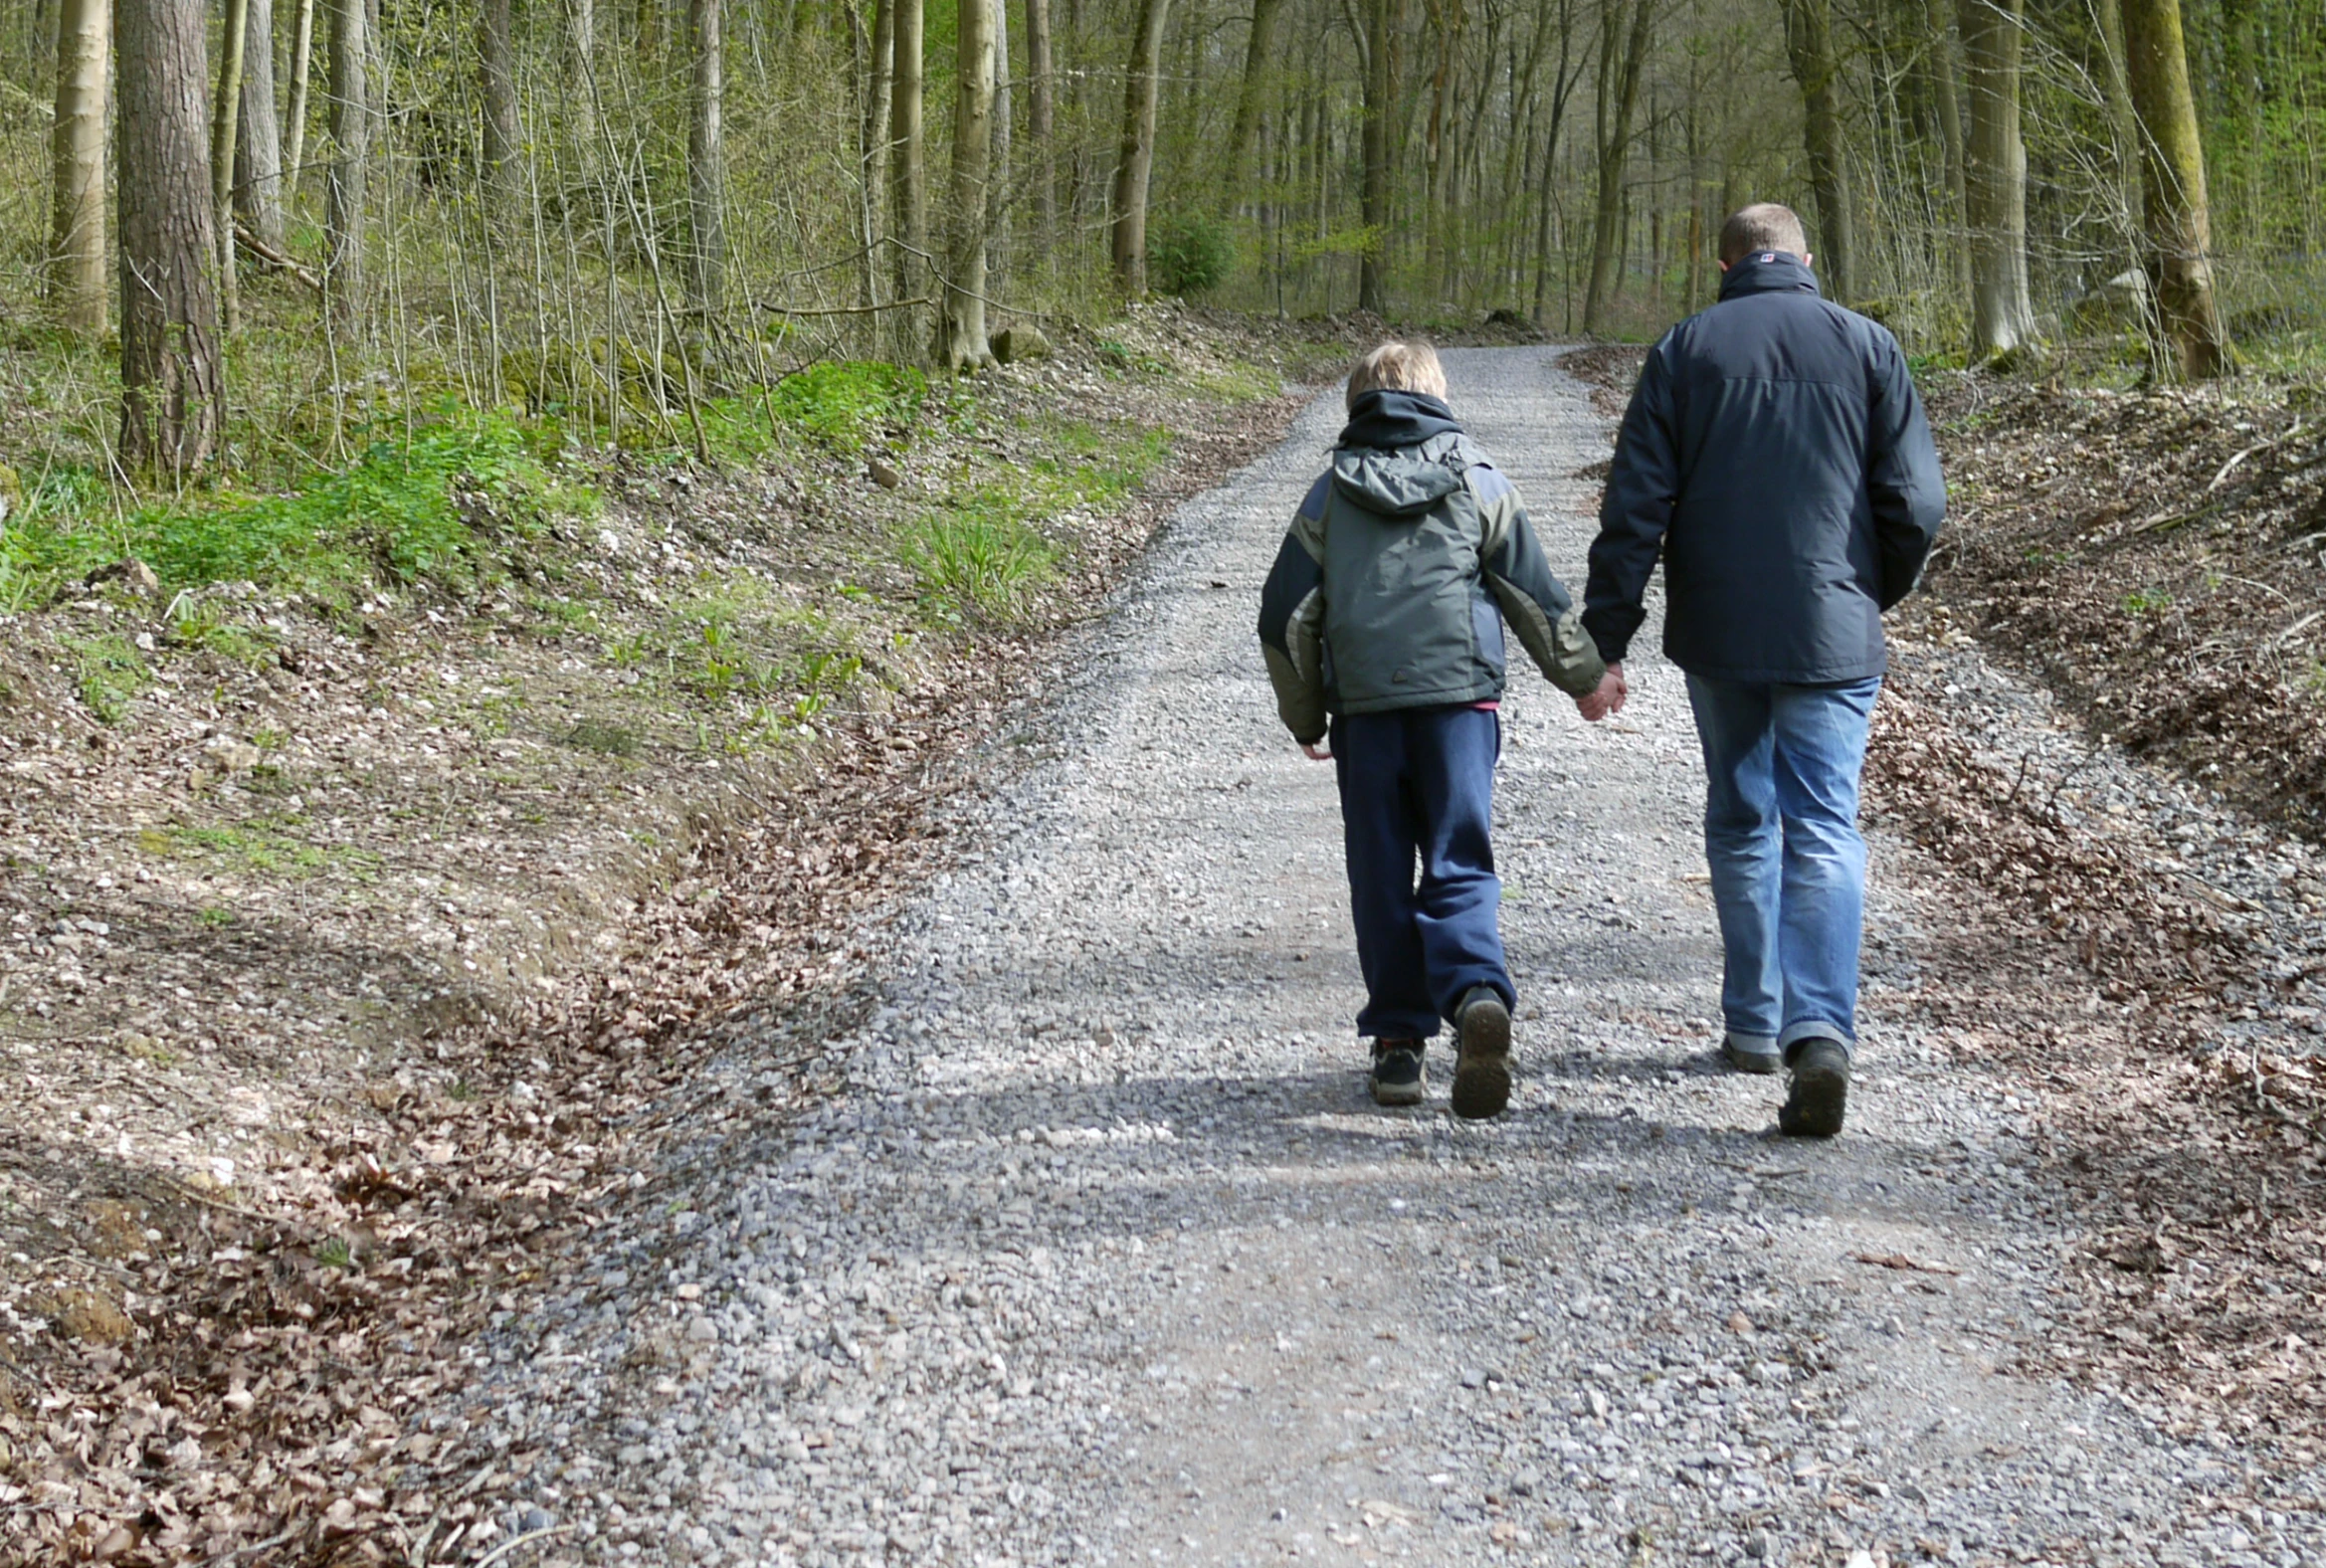 a man and woman walking on the road holding hands